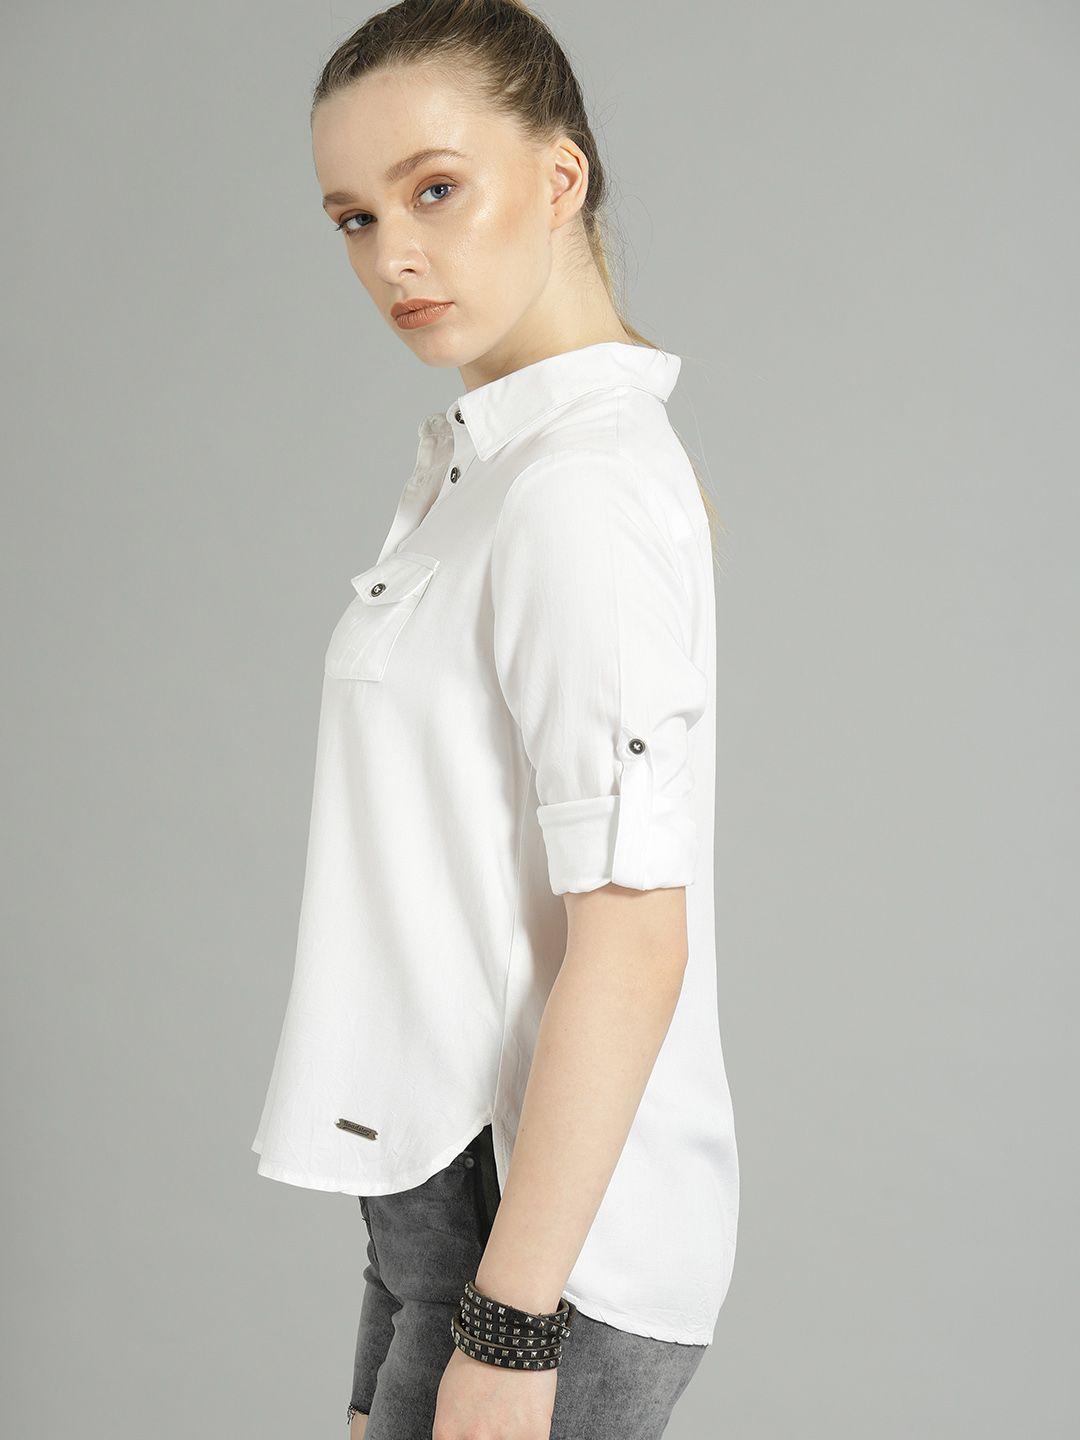 the roadster lifestyle co women white regular fit solid casual shirt